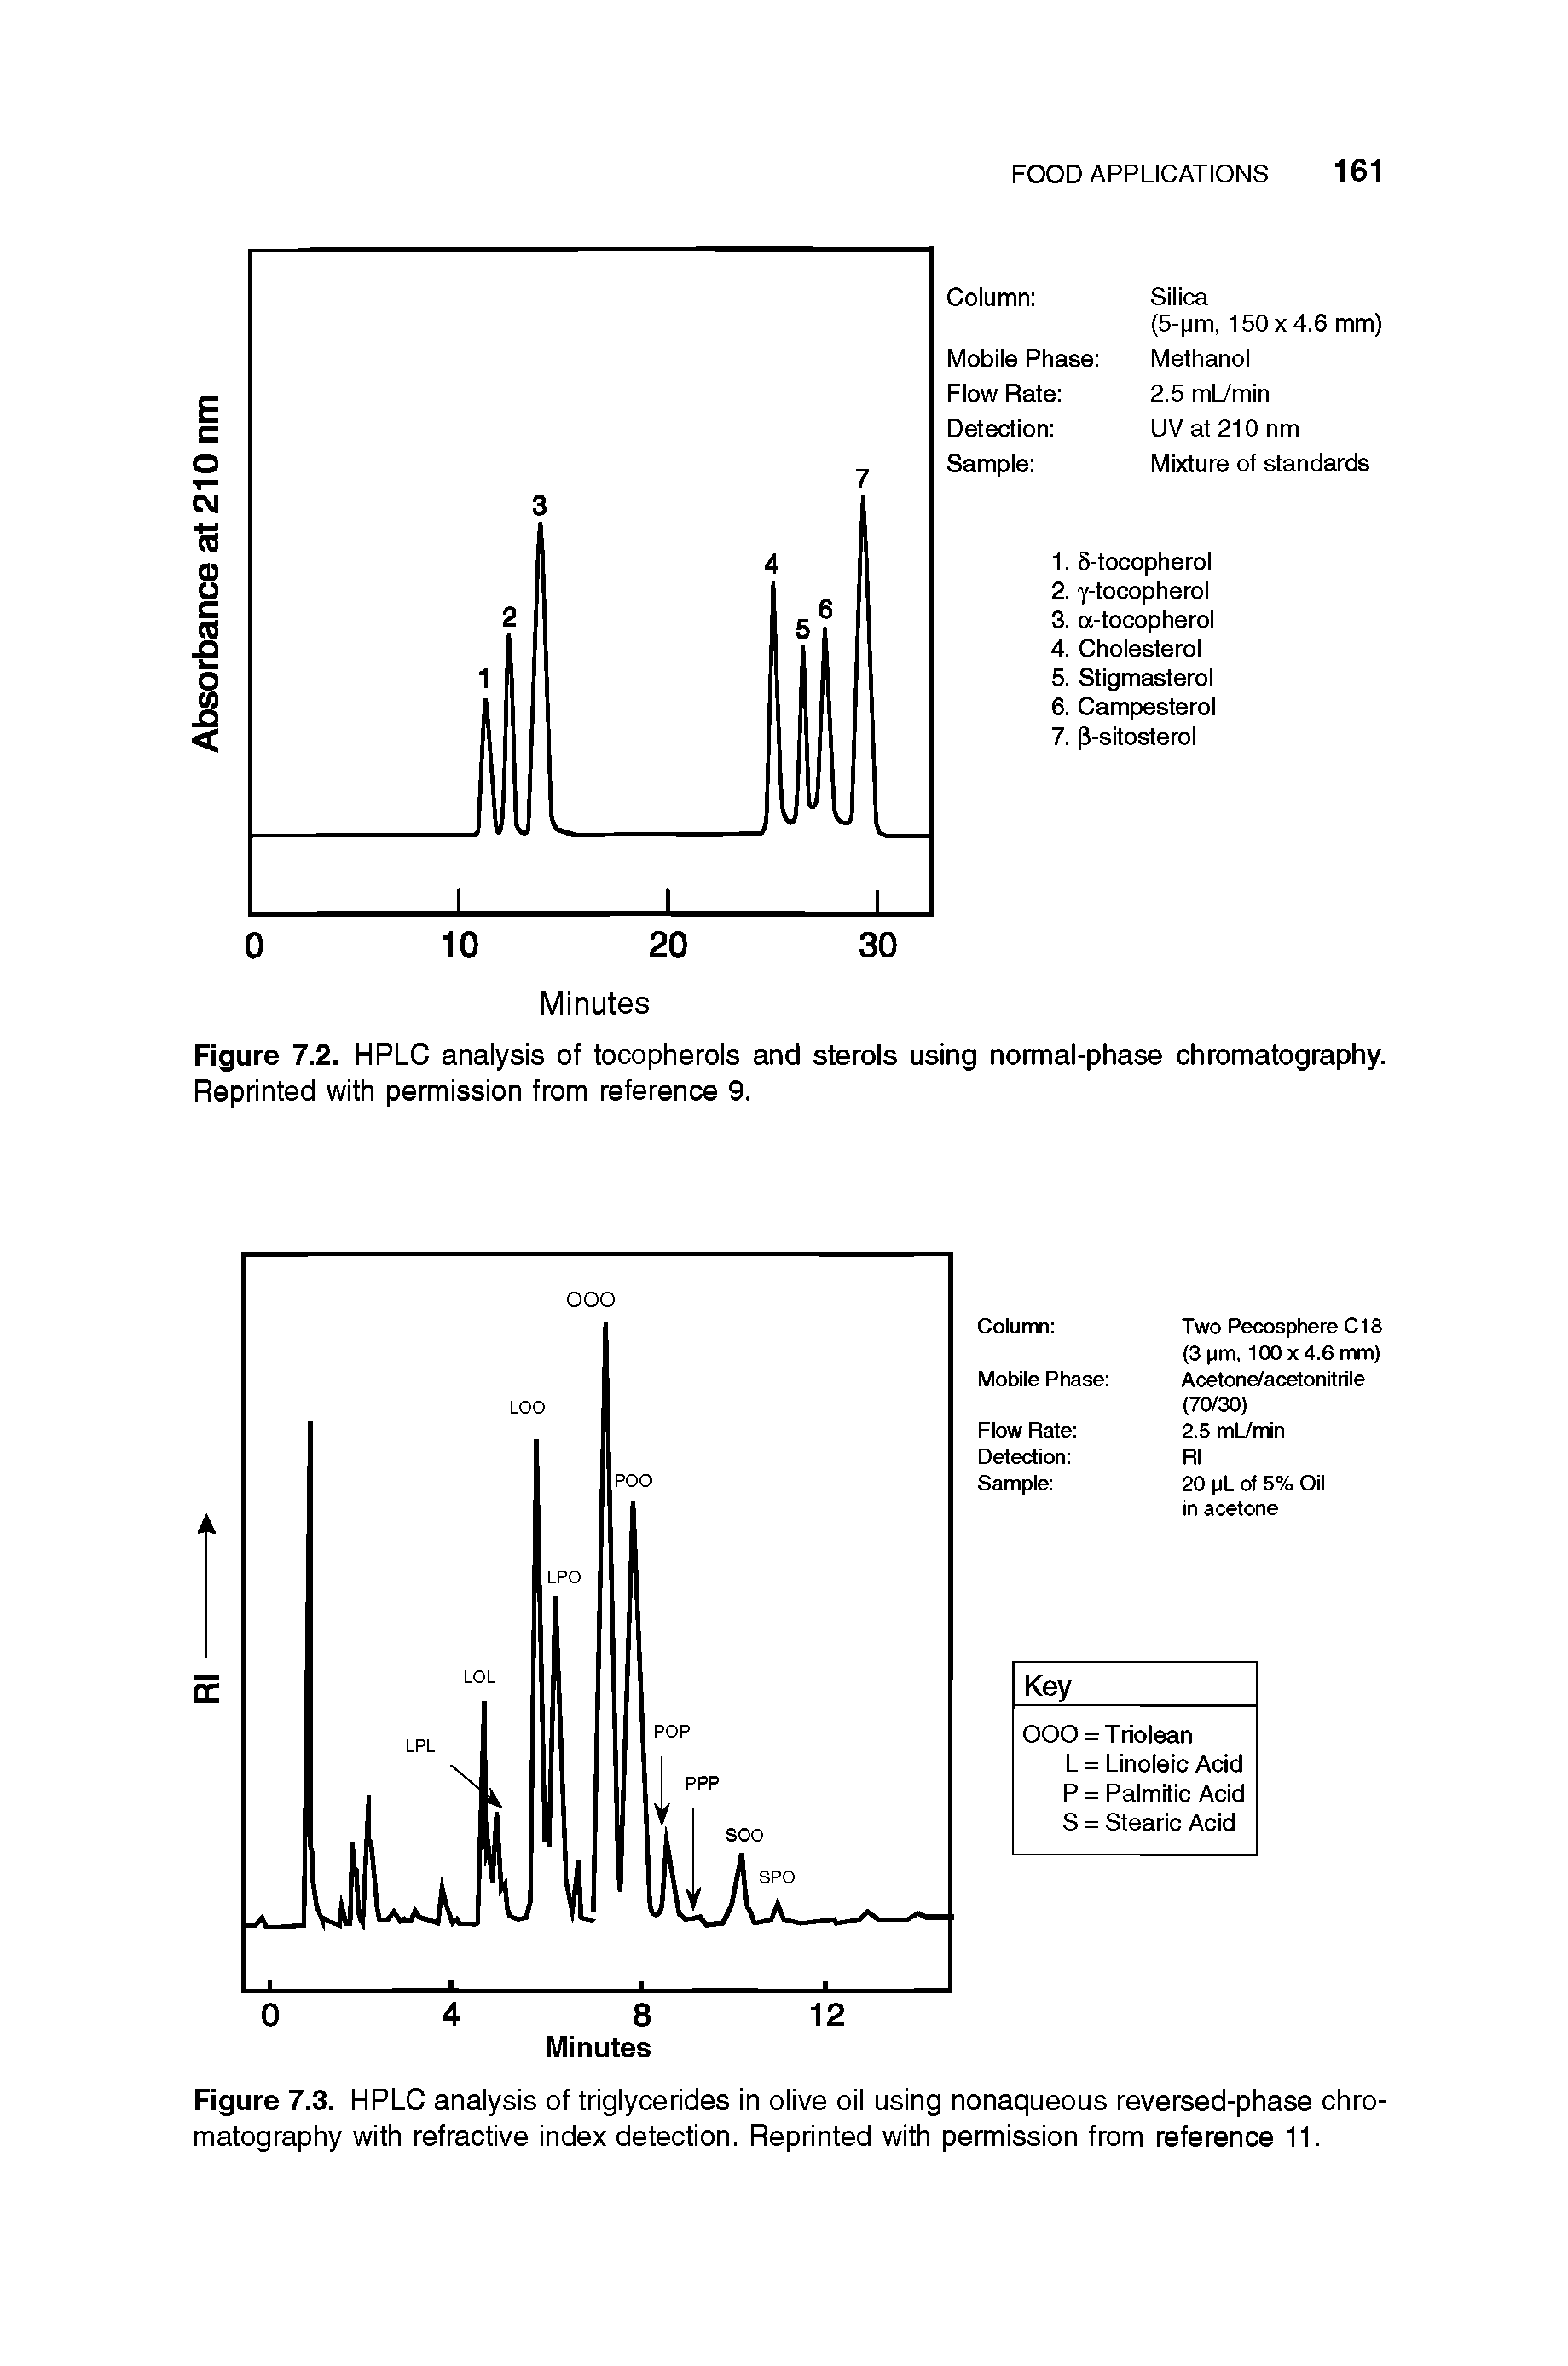 Figure 7.3. HPLC analysis of triglycerides in olive oil using nonaqueous reversed-phase chromatography with refractive index detection. Reprinted with permission from reference 11.